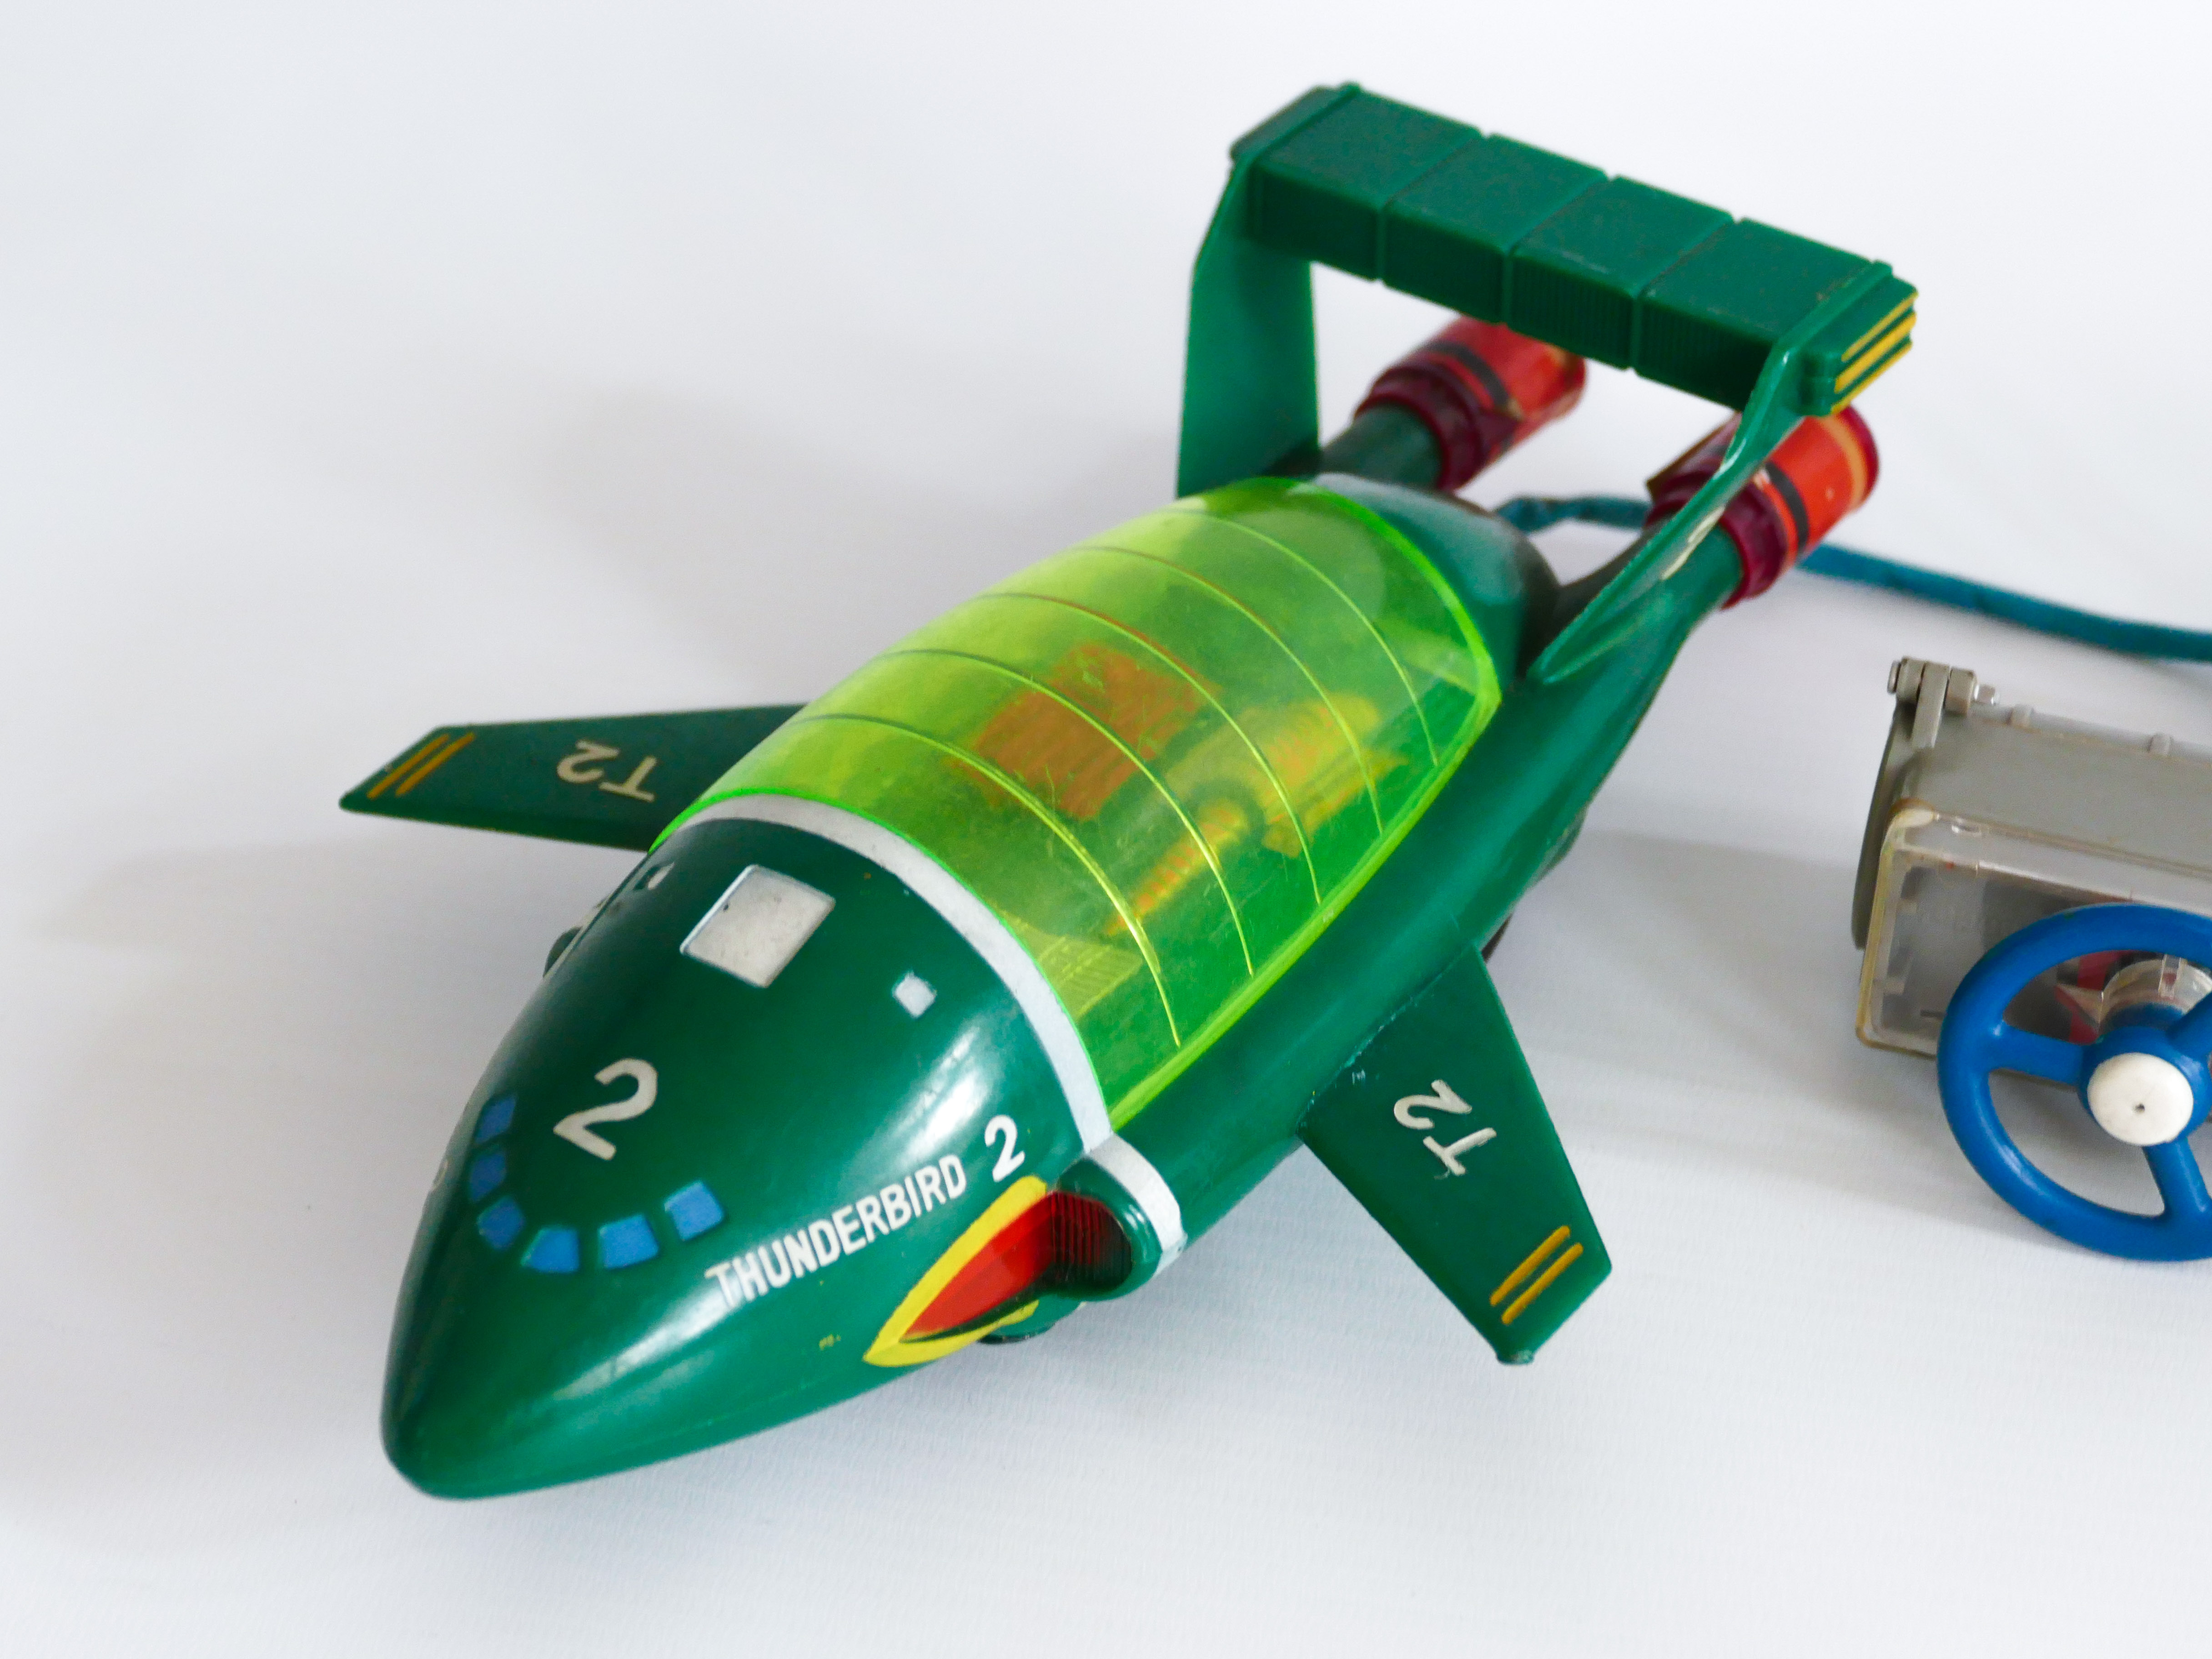 BANDAI THUNDERBIRD 2 REMOTE CONTROL SPACE SHIP THUNDERBIRDS GERRY ANDERSON VINTAGE SPACE TOY JAPAN - Image 3 of 3